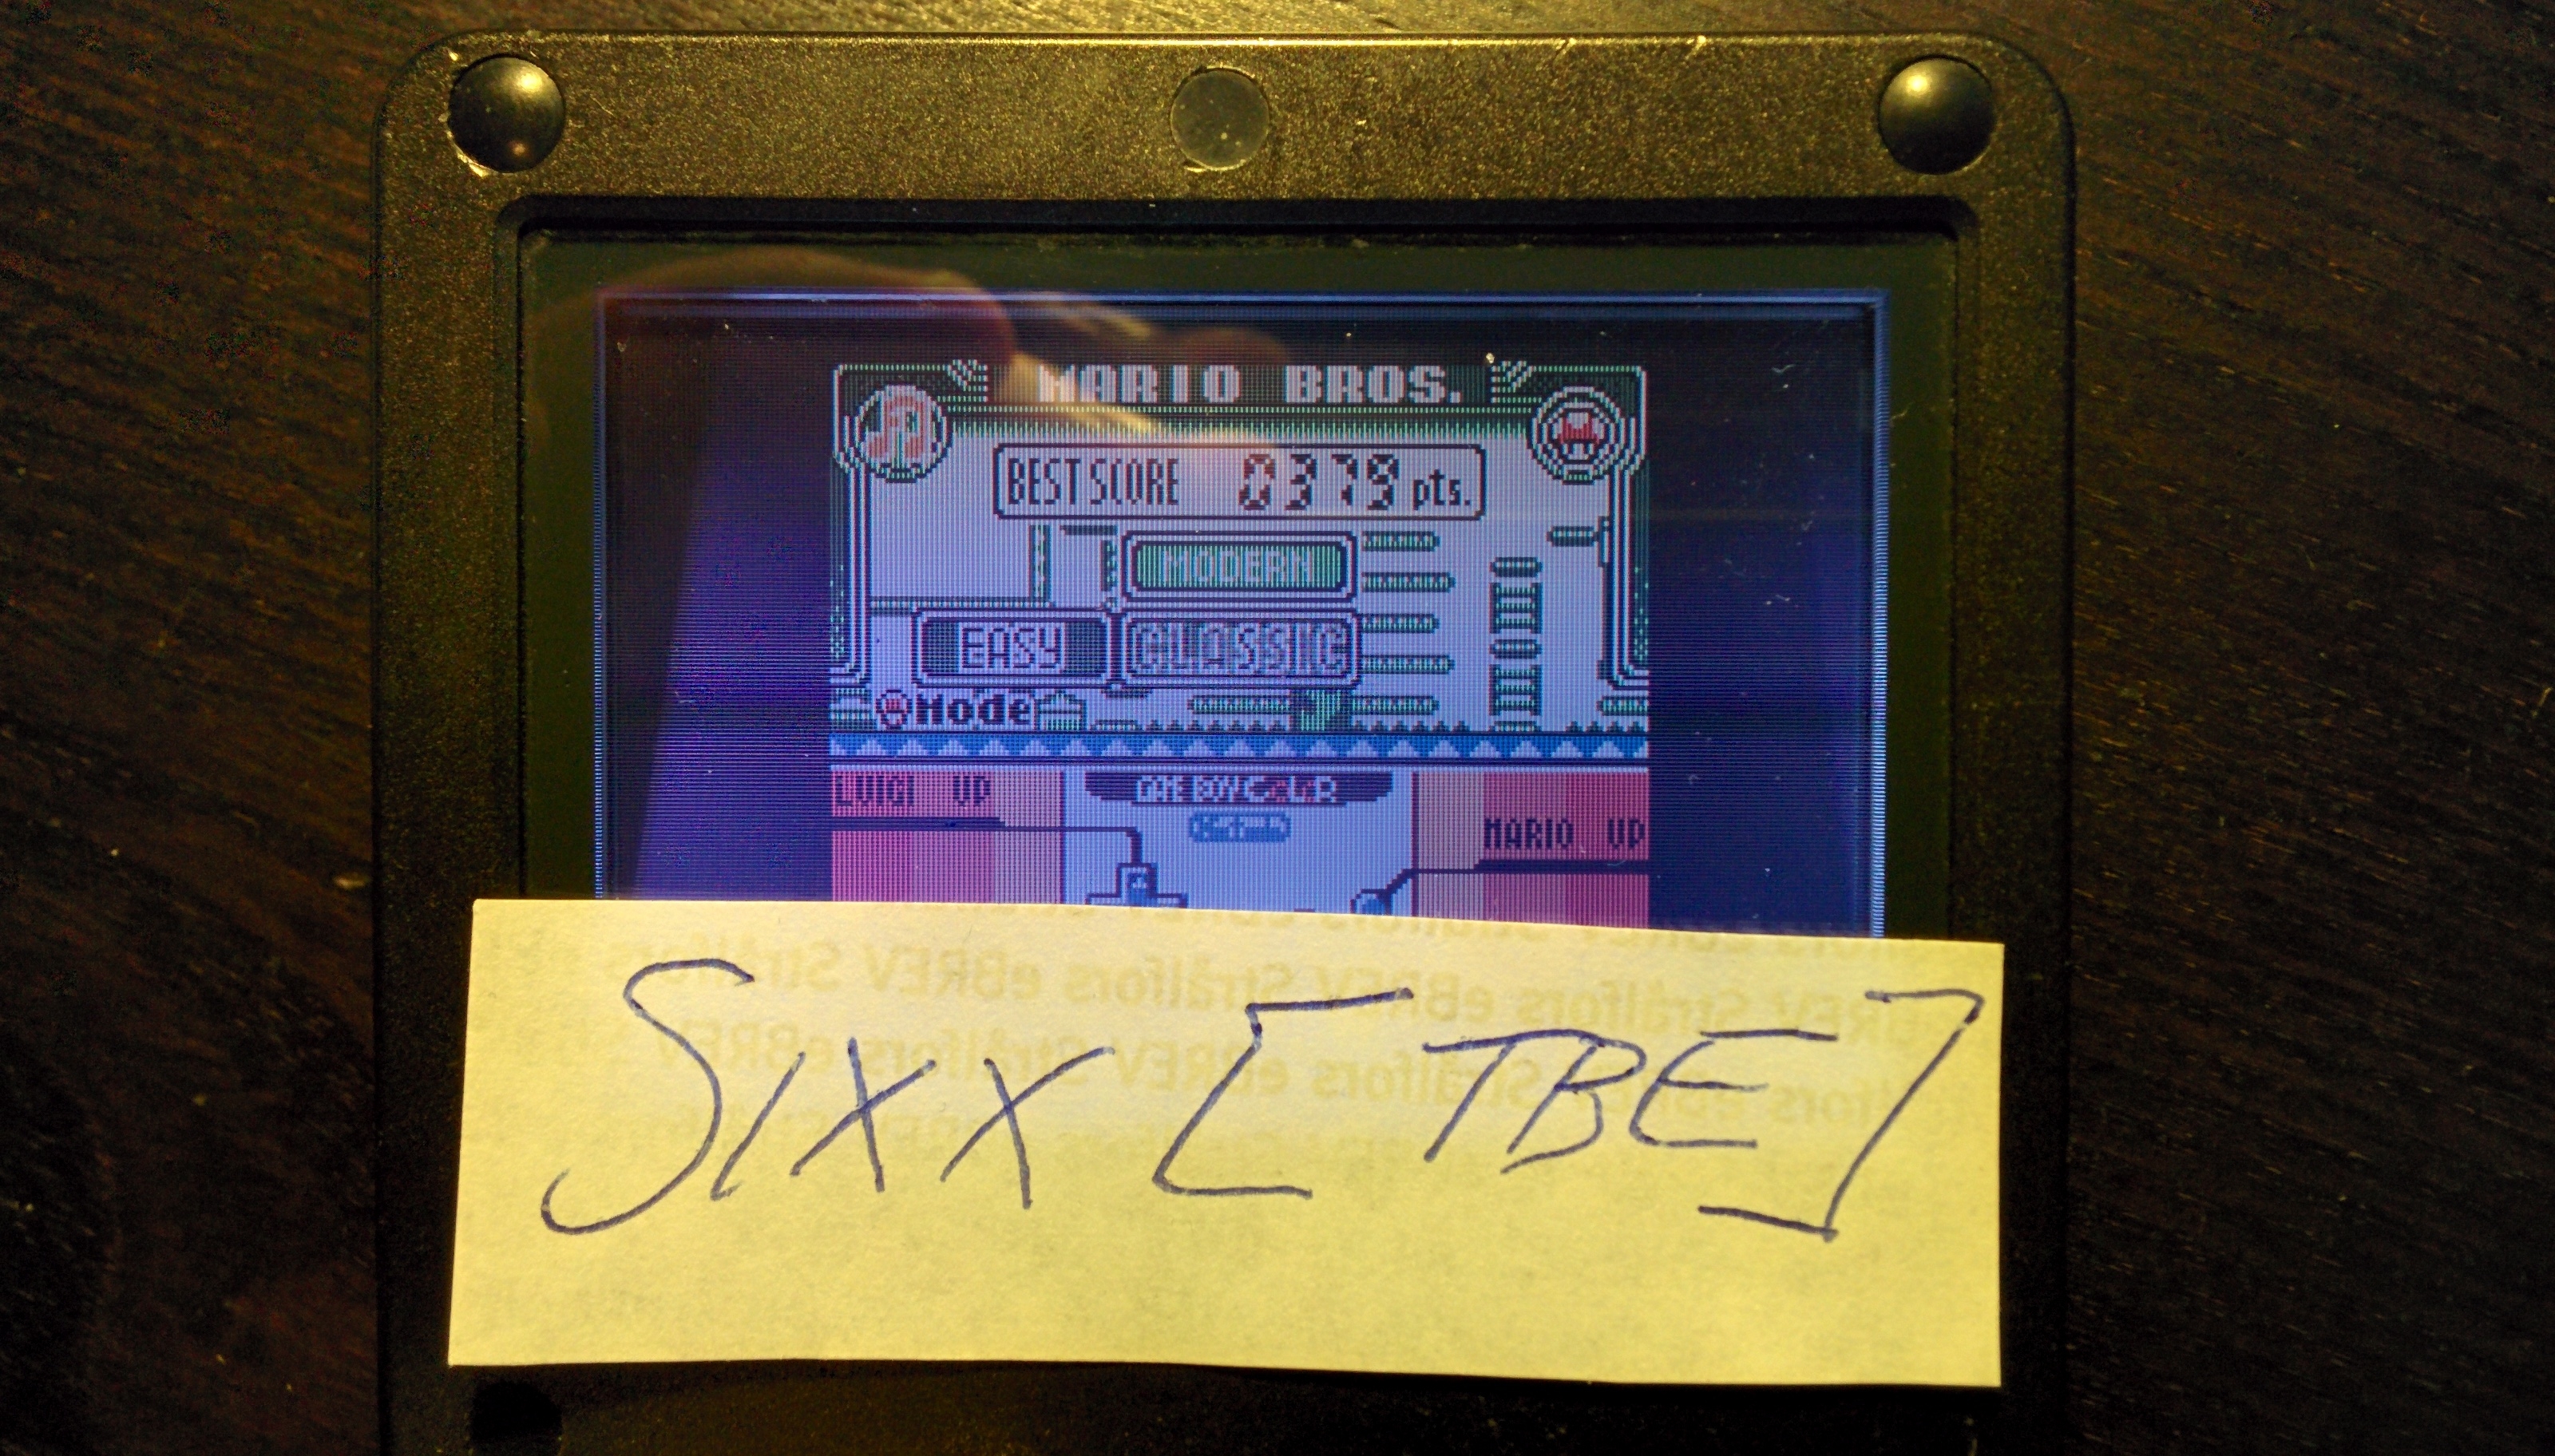 Sixx: Game & Watch Gallery 3: Mario Bros: Classic: Easy (Game Boy Color) 379 points on 2014-09-05 14:32:46